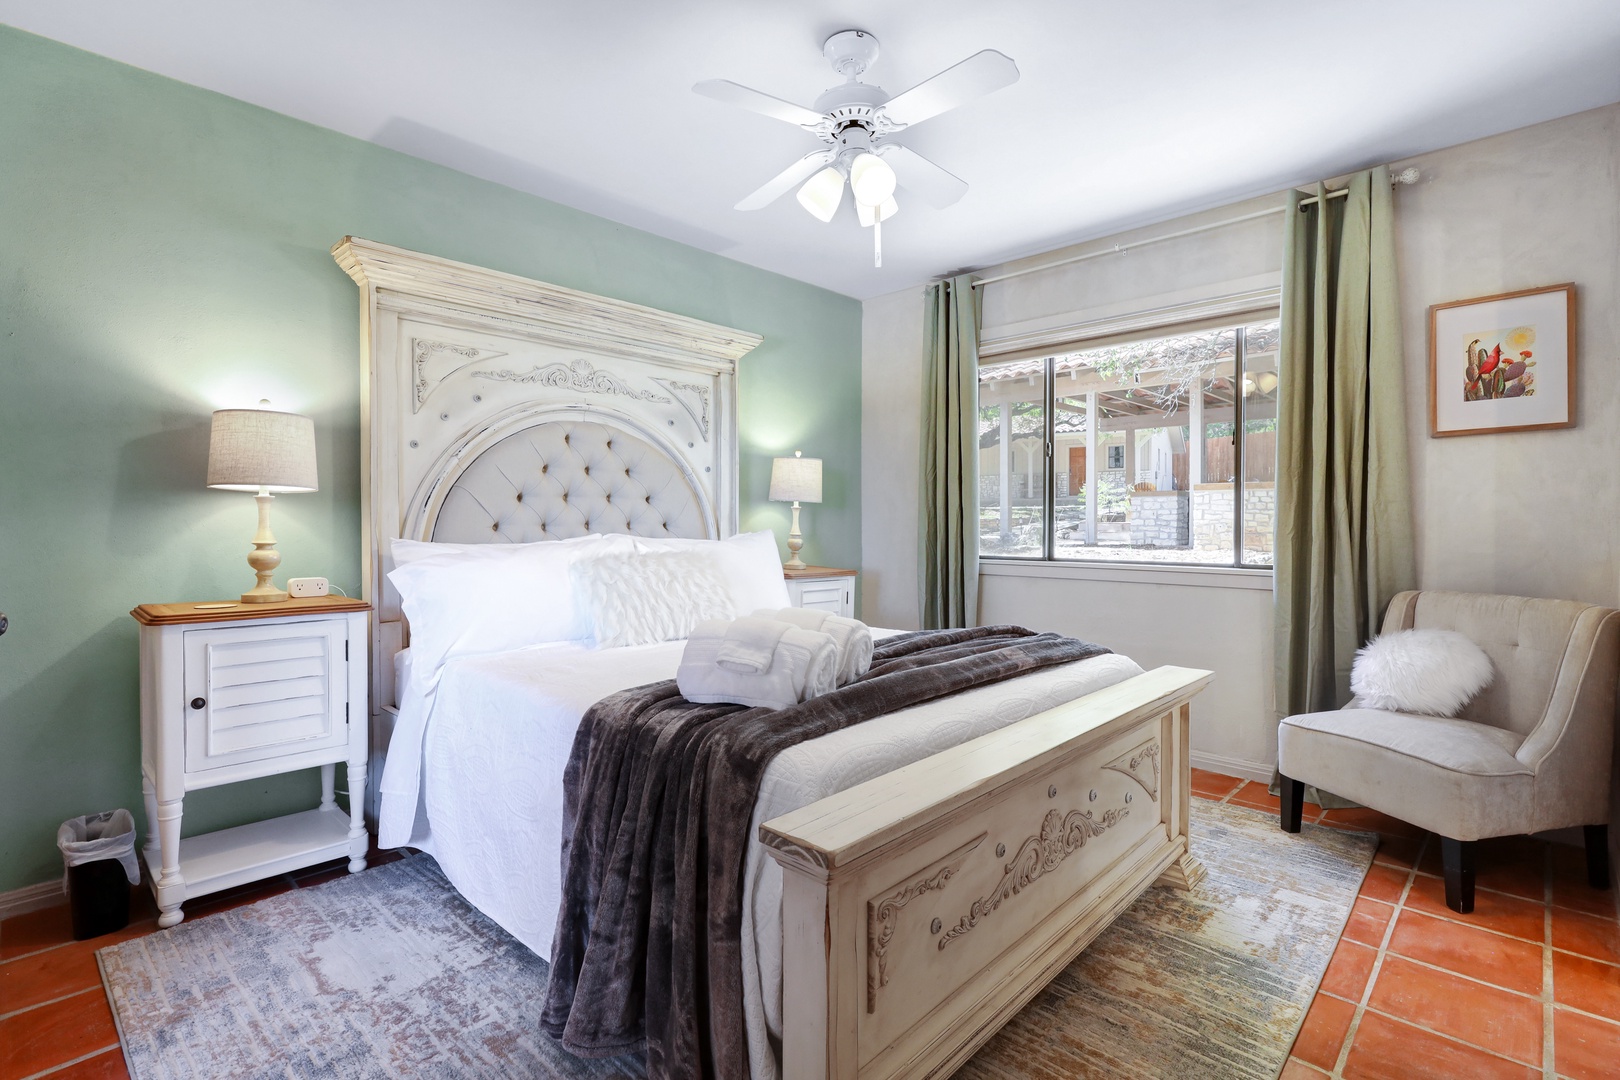 This elegant queen suite includes access to a Jack & Jill bathroom